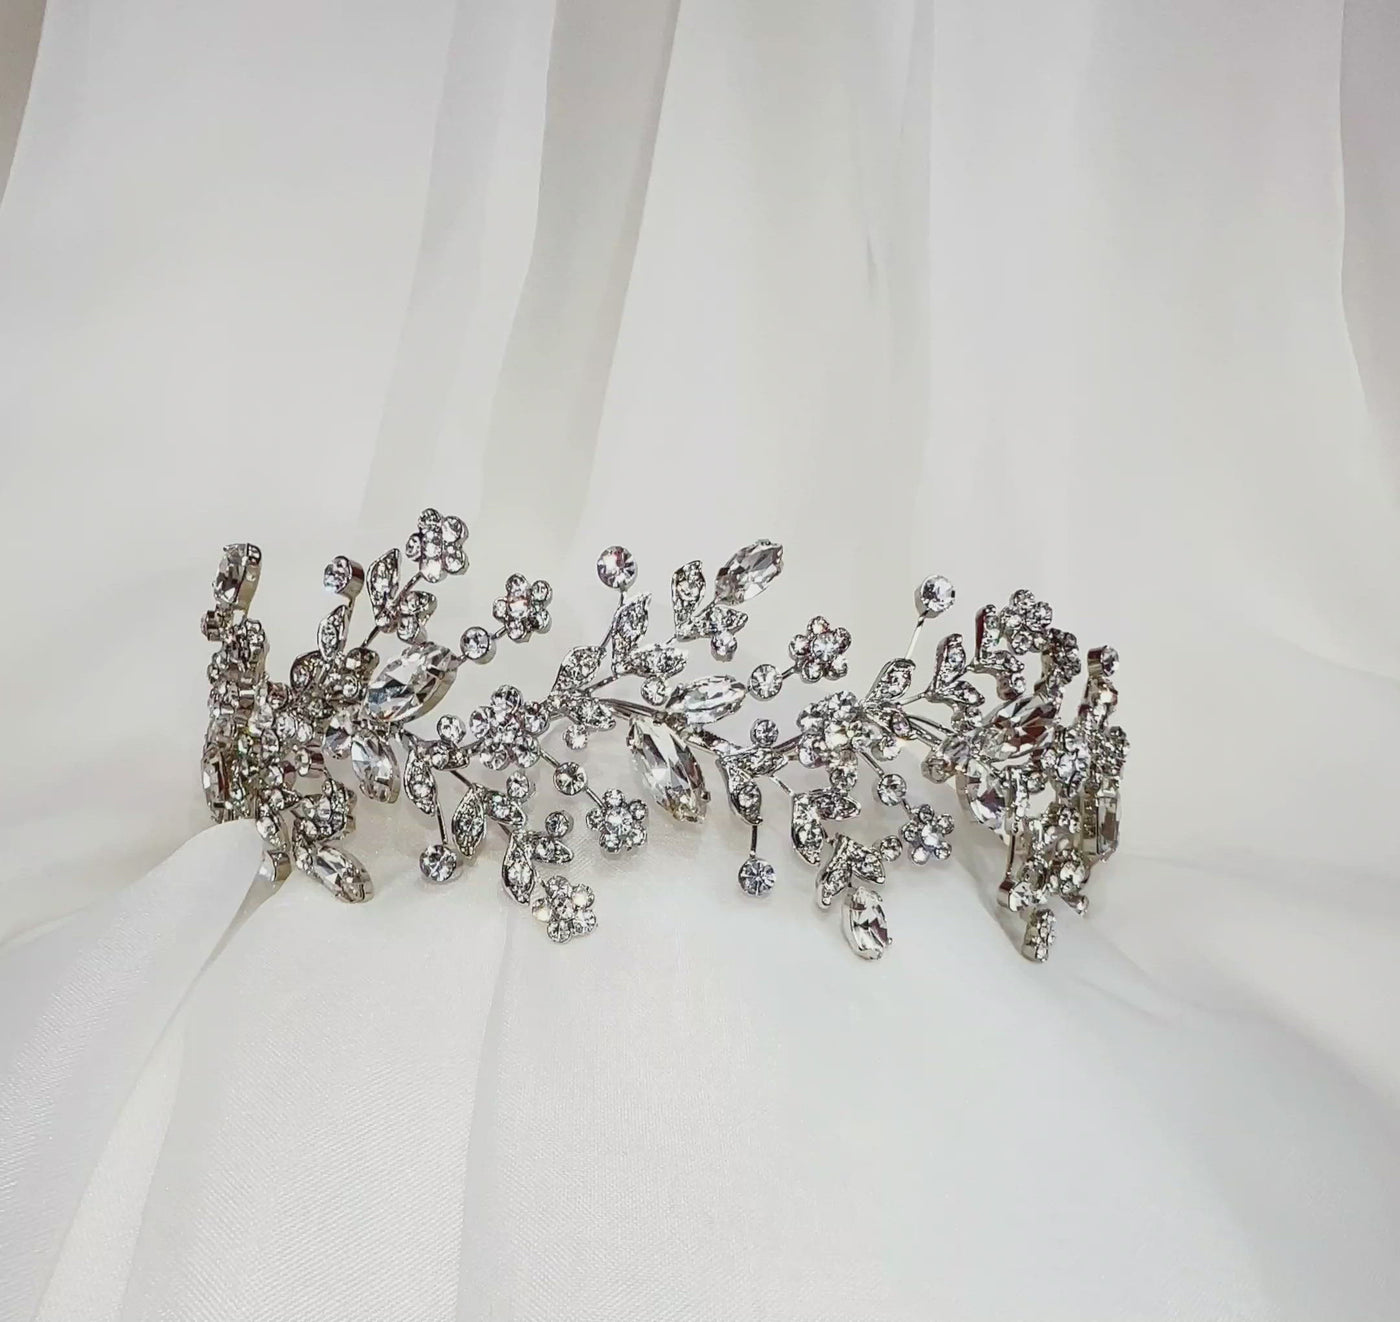 silver bridal headband with sparkling sprigs of floral crystal details